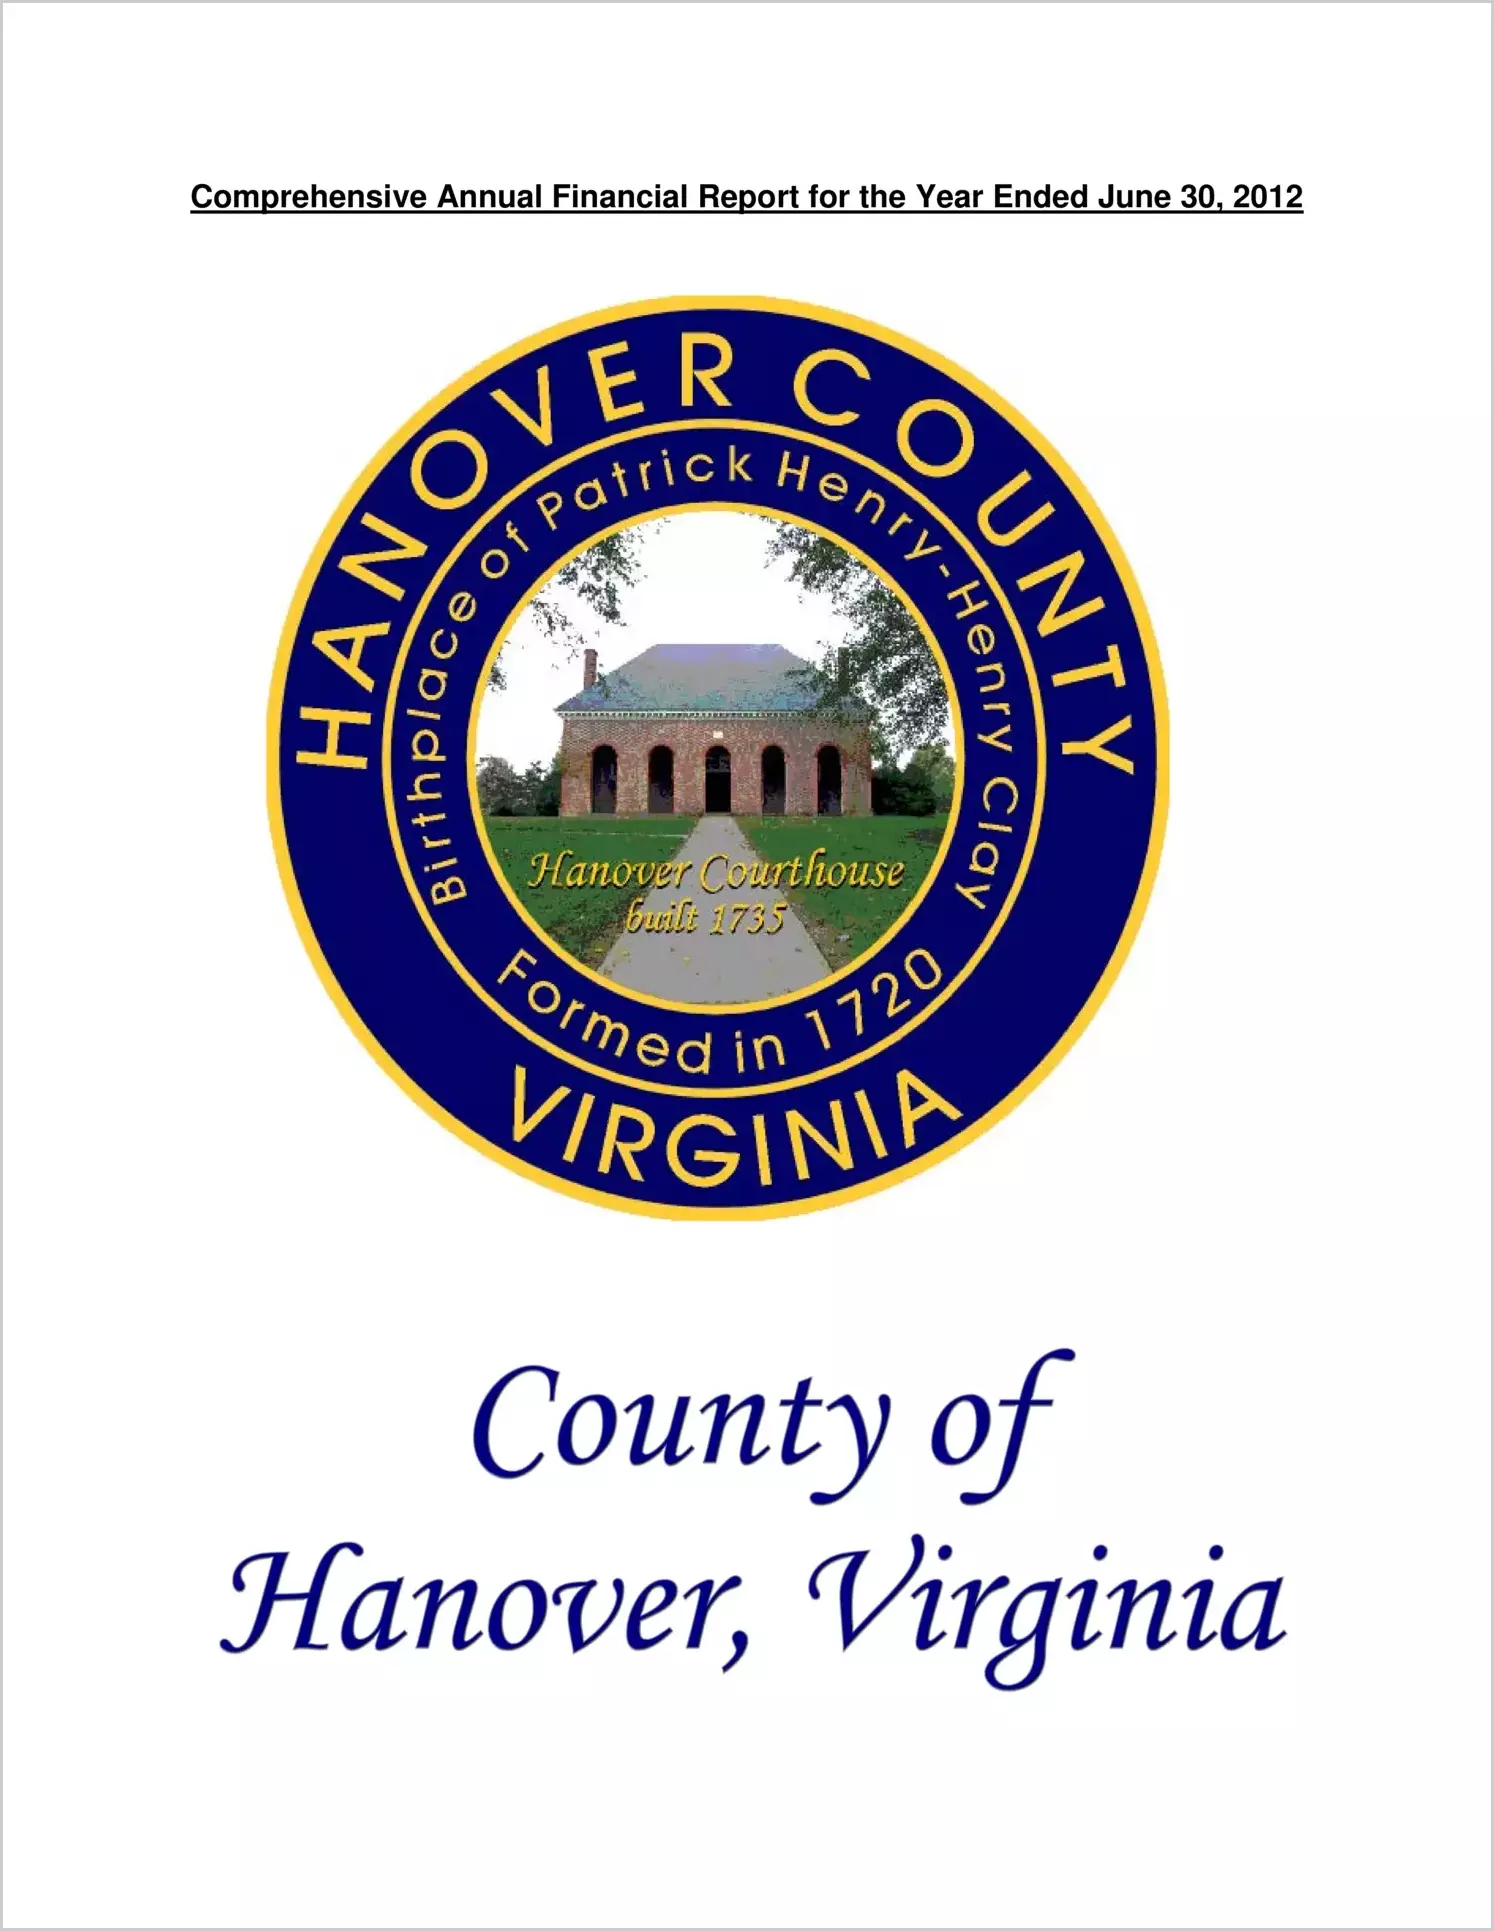 2012 Annual Financial Report for County of Hanover